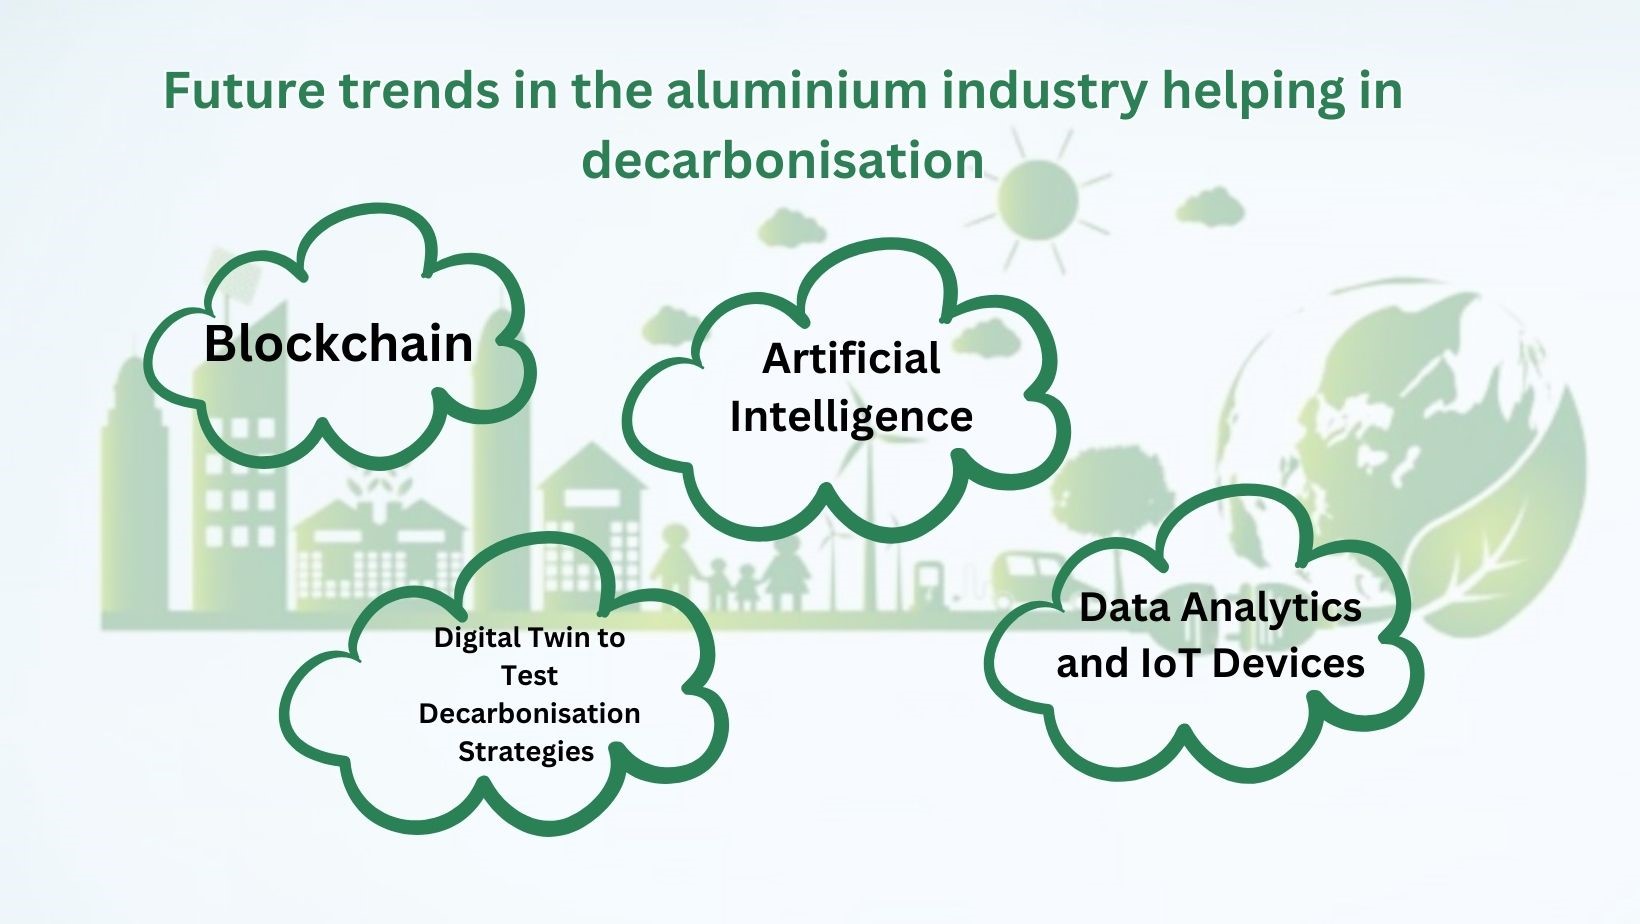 Future trends in the aluminium industry helping in decarbonisation